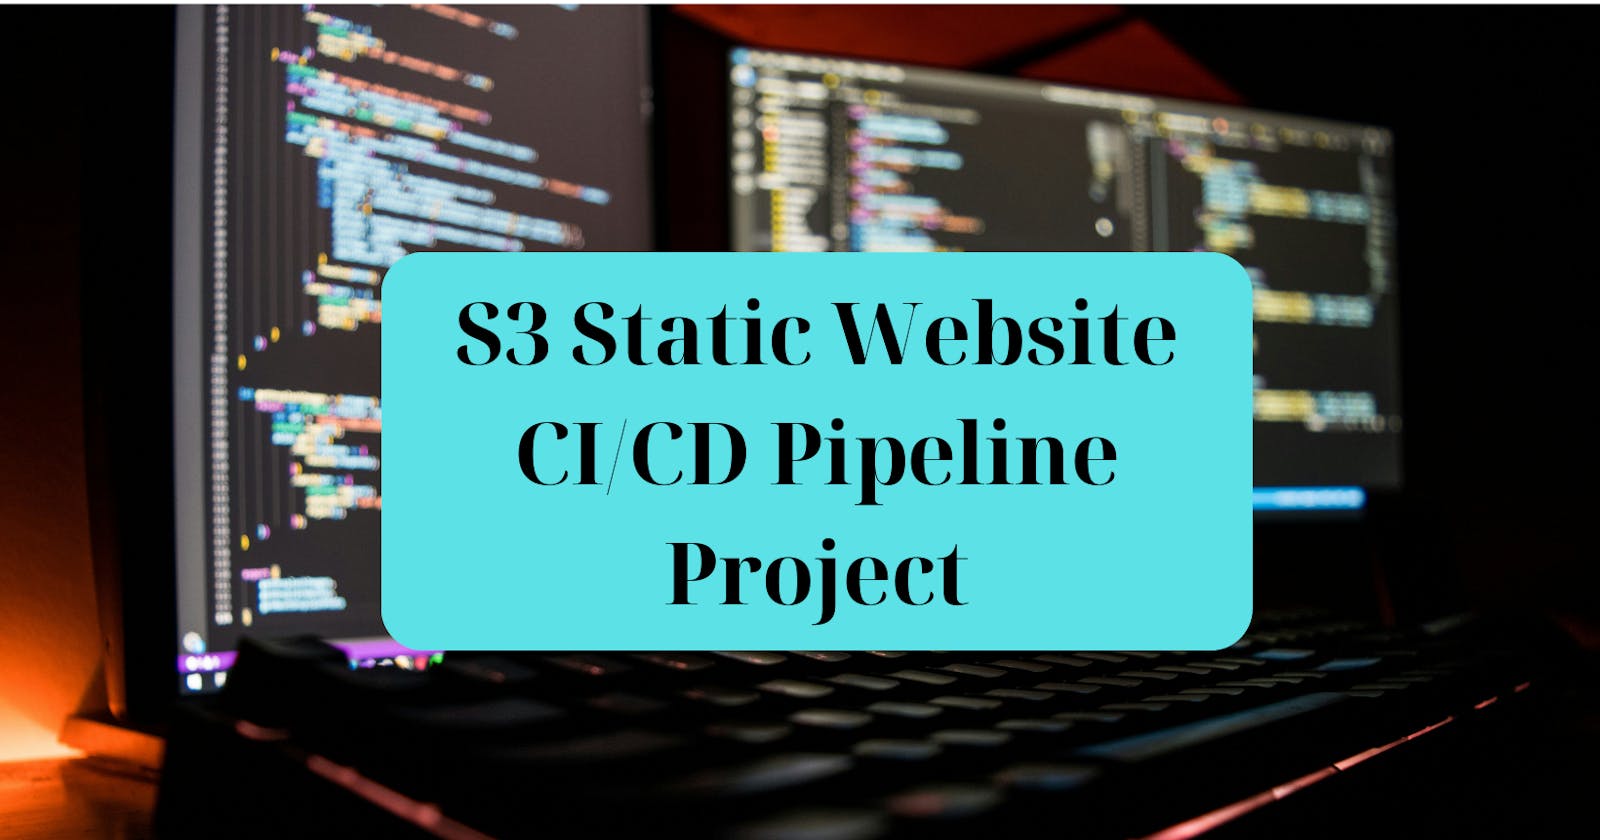 Creating a CI/CD Pipeline for an Amazon S3 Static Website